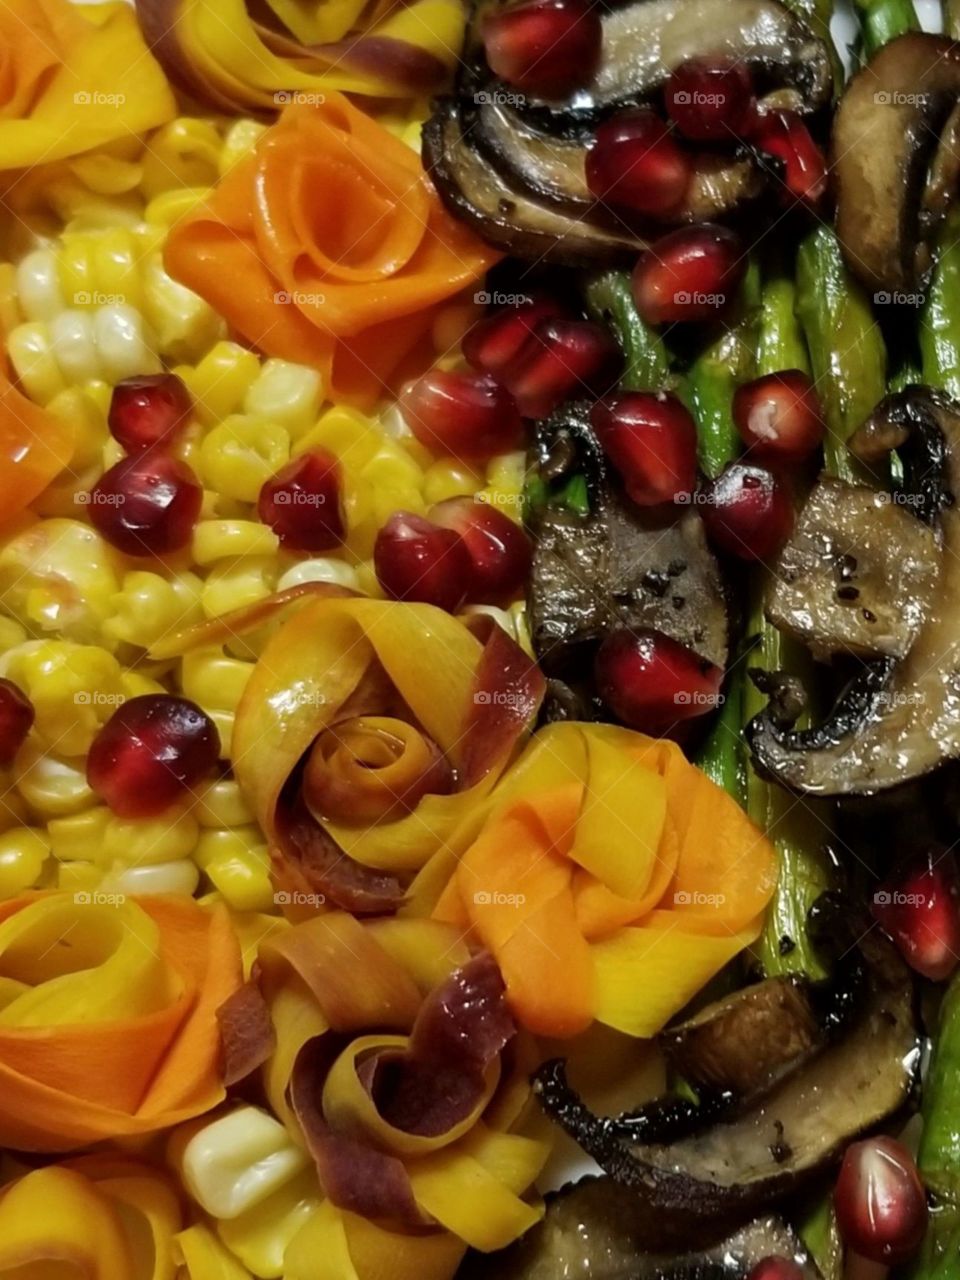 Harvest colors,  textures, and Fall flavors in an artistic plate of delicious morsels. Rainbow carrot strips in purple, yellow and orange have been hand fashioned into an edible floral  salute to the Autumn harvest.